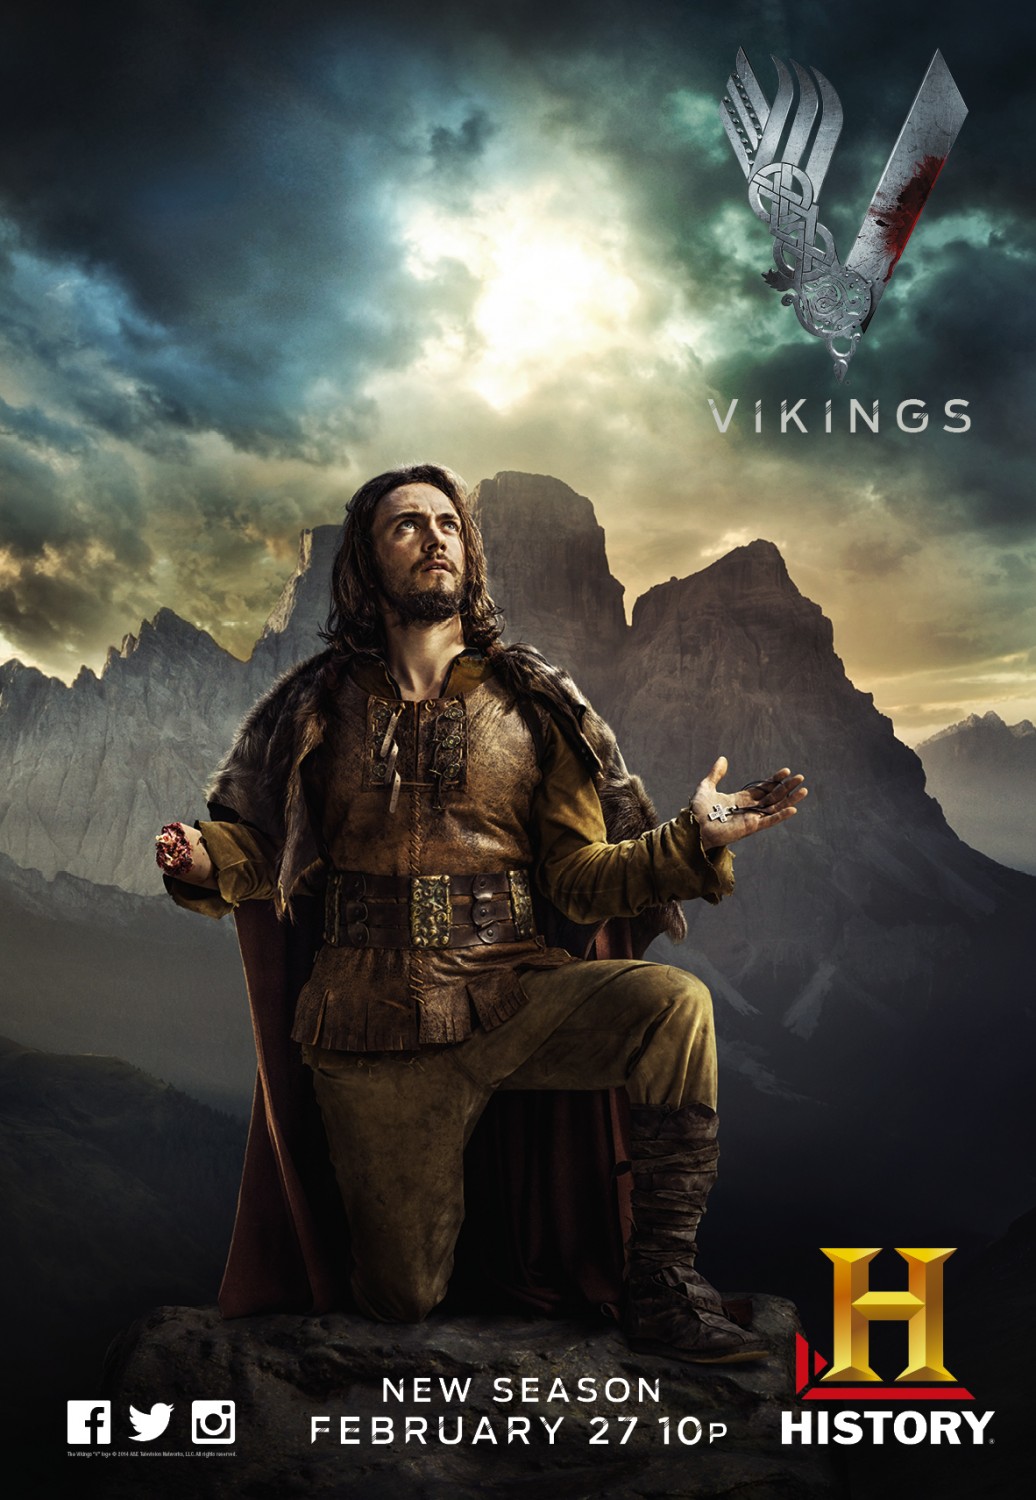 Extra Large TV Poster Image for Vikings (#6 of 30)